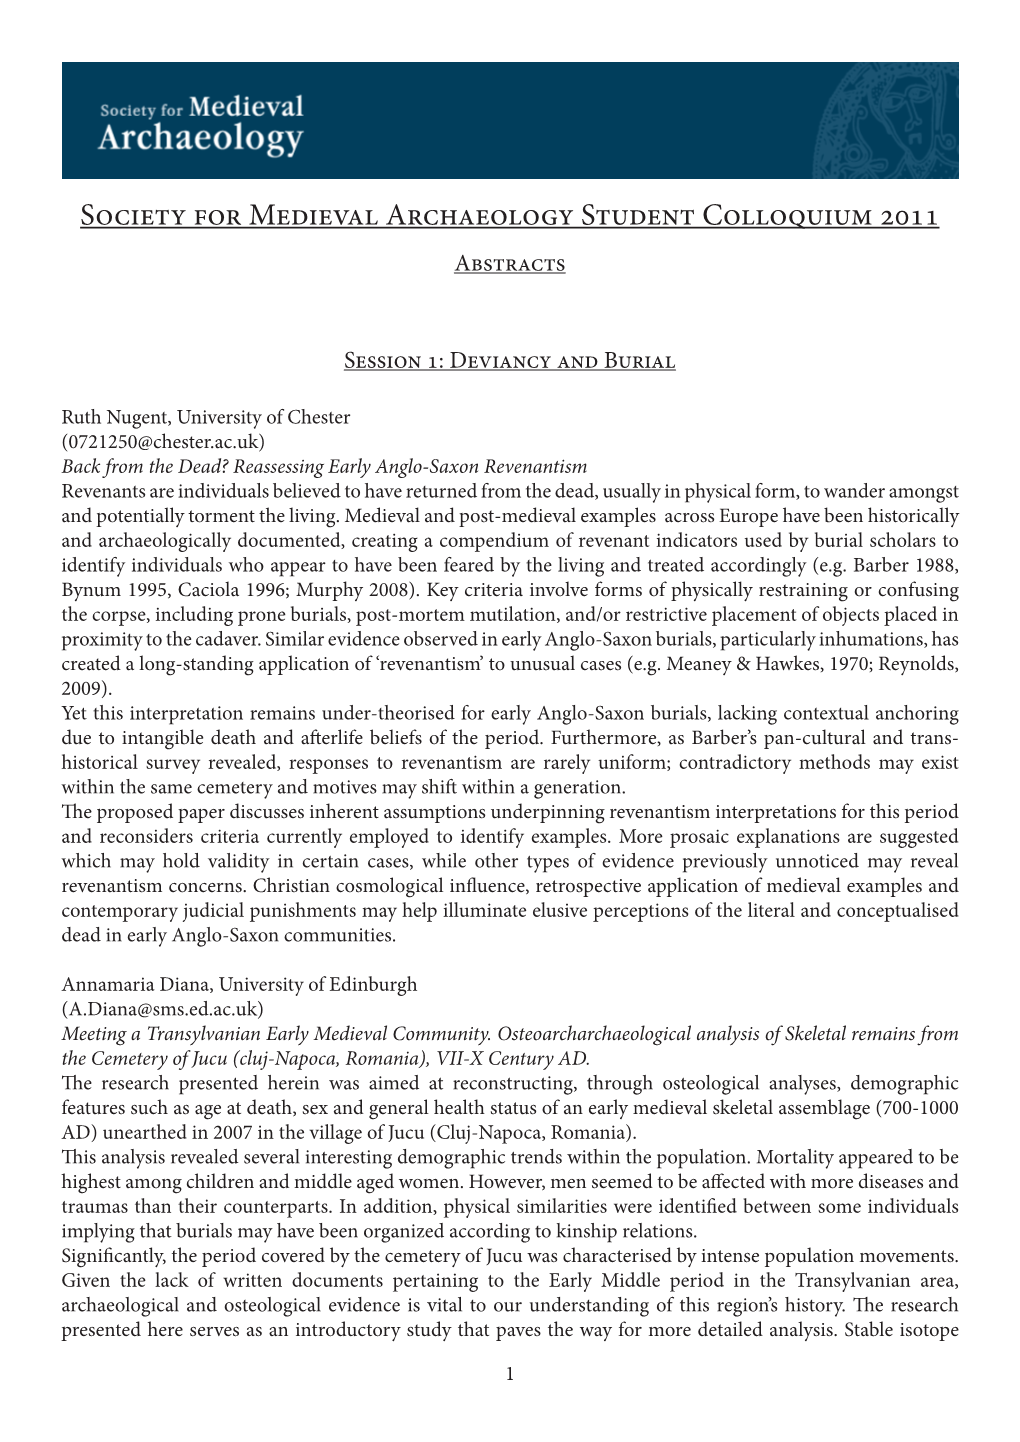 Society for Medieval Archaeology Student Colloquium 2011 Abstracts